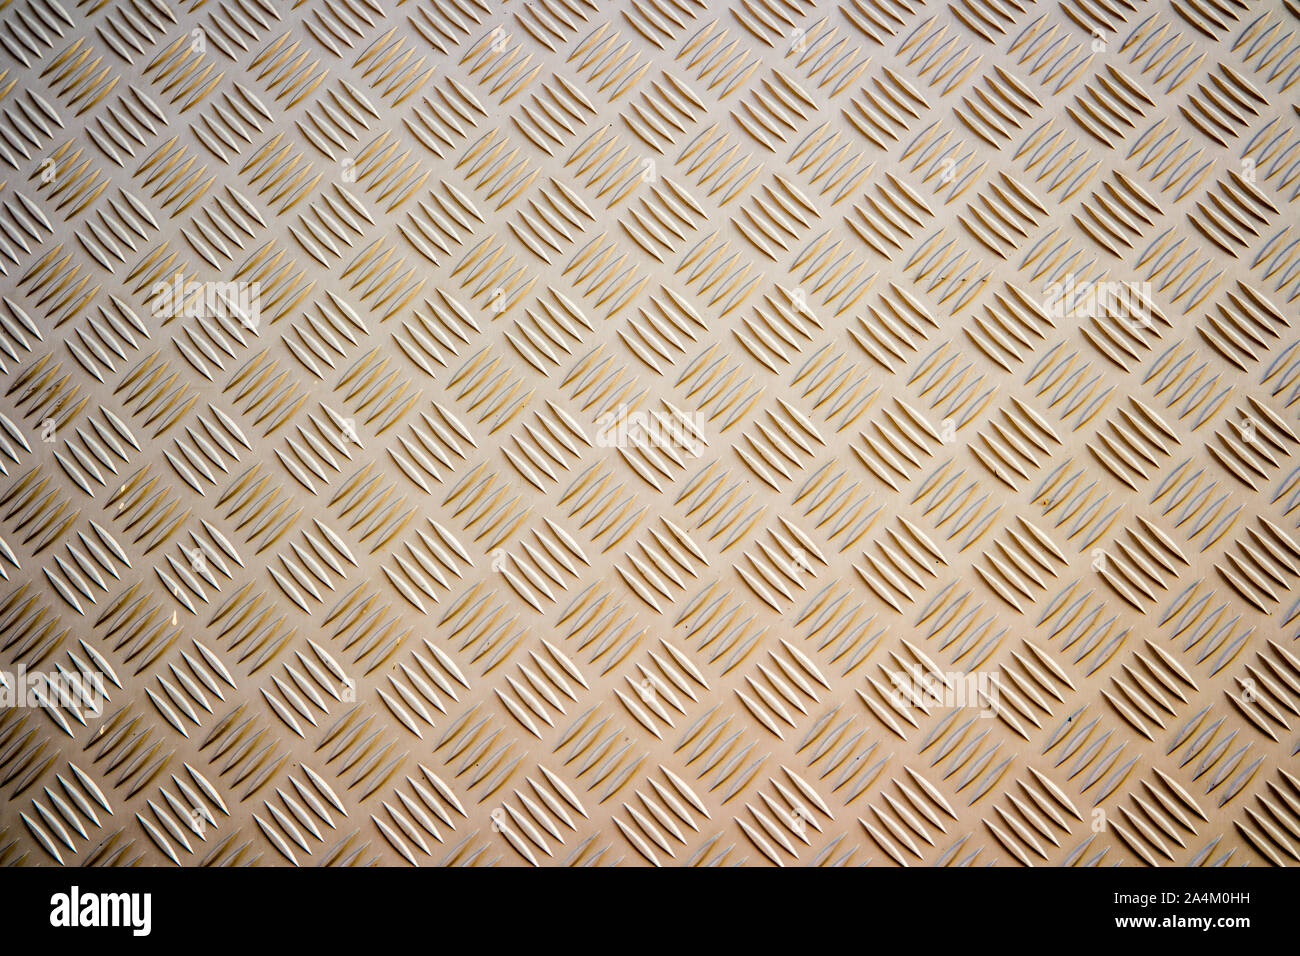 Metal surface background Stock Photo